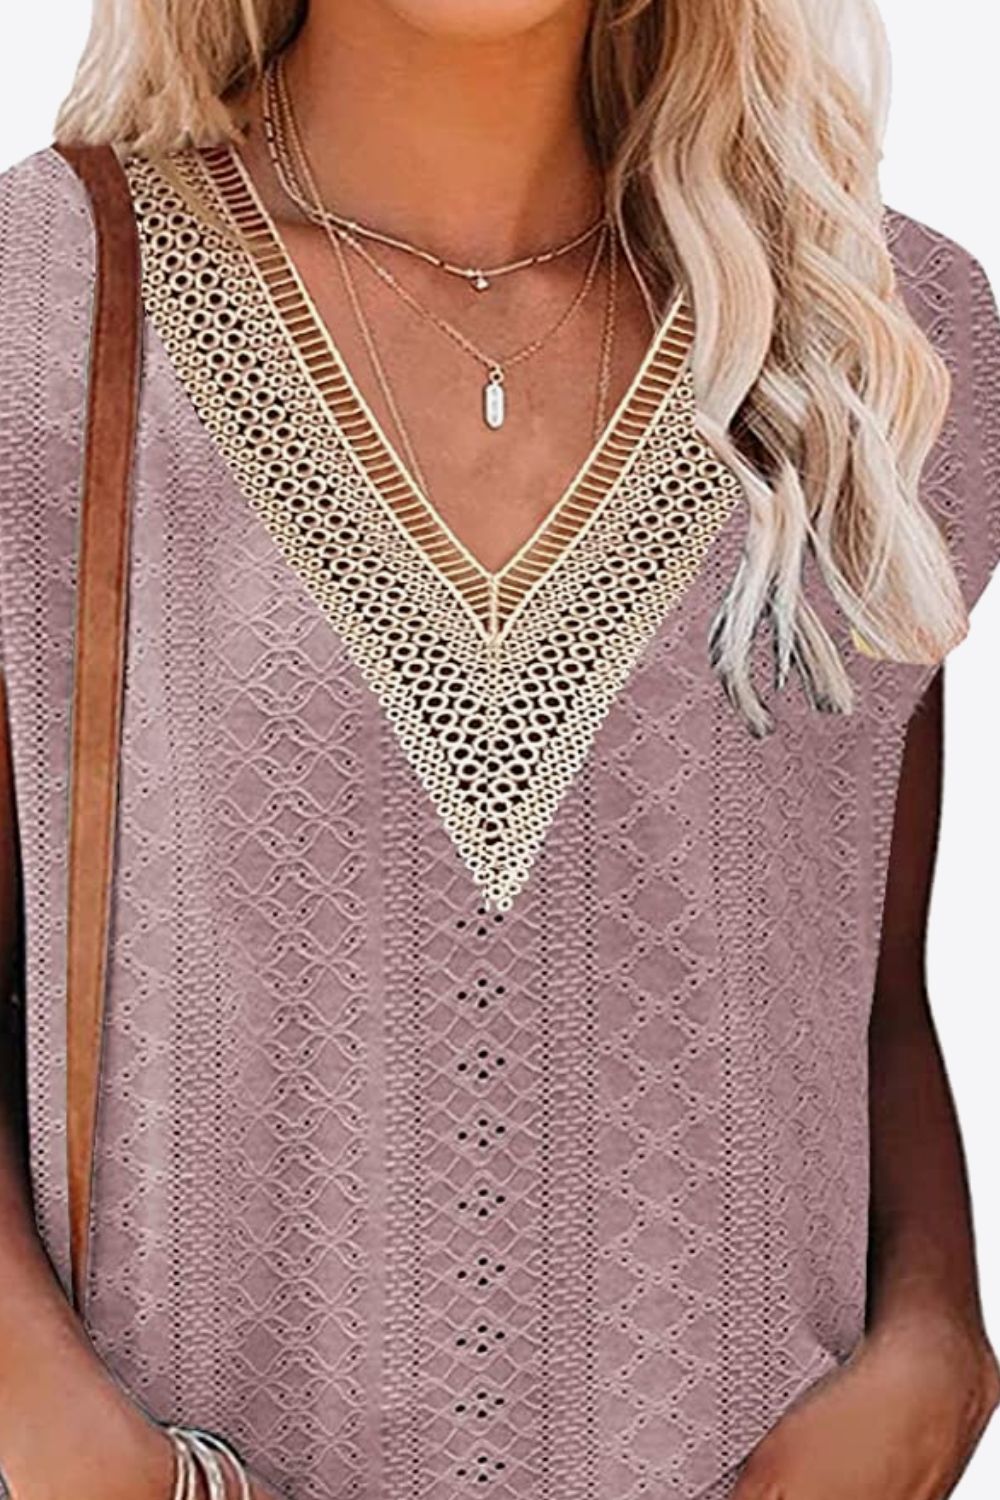 Rosy Brown Eyelet Contrast V-Neck Tee Sentient Beauty Fashions Tops